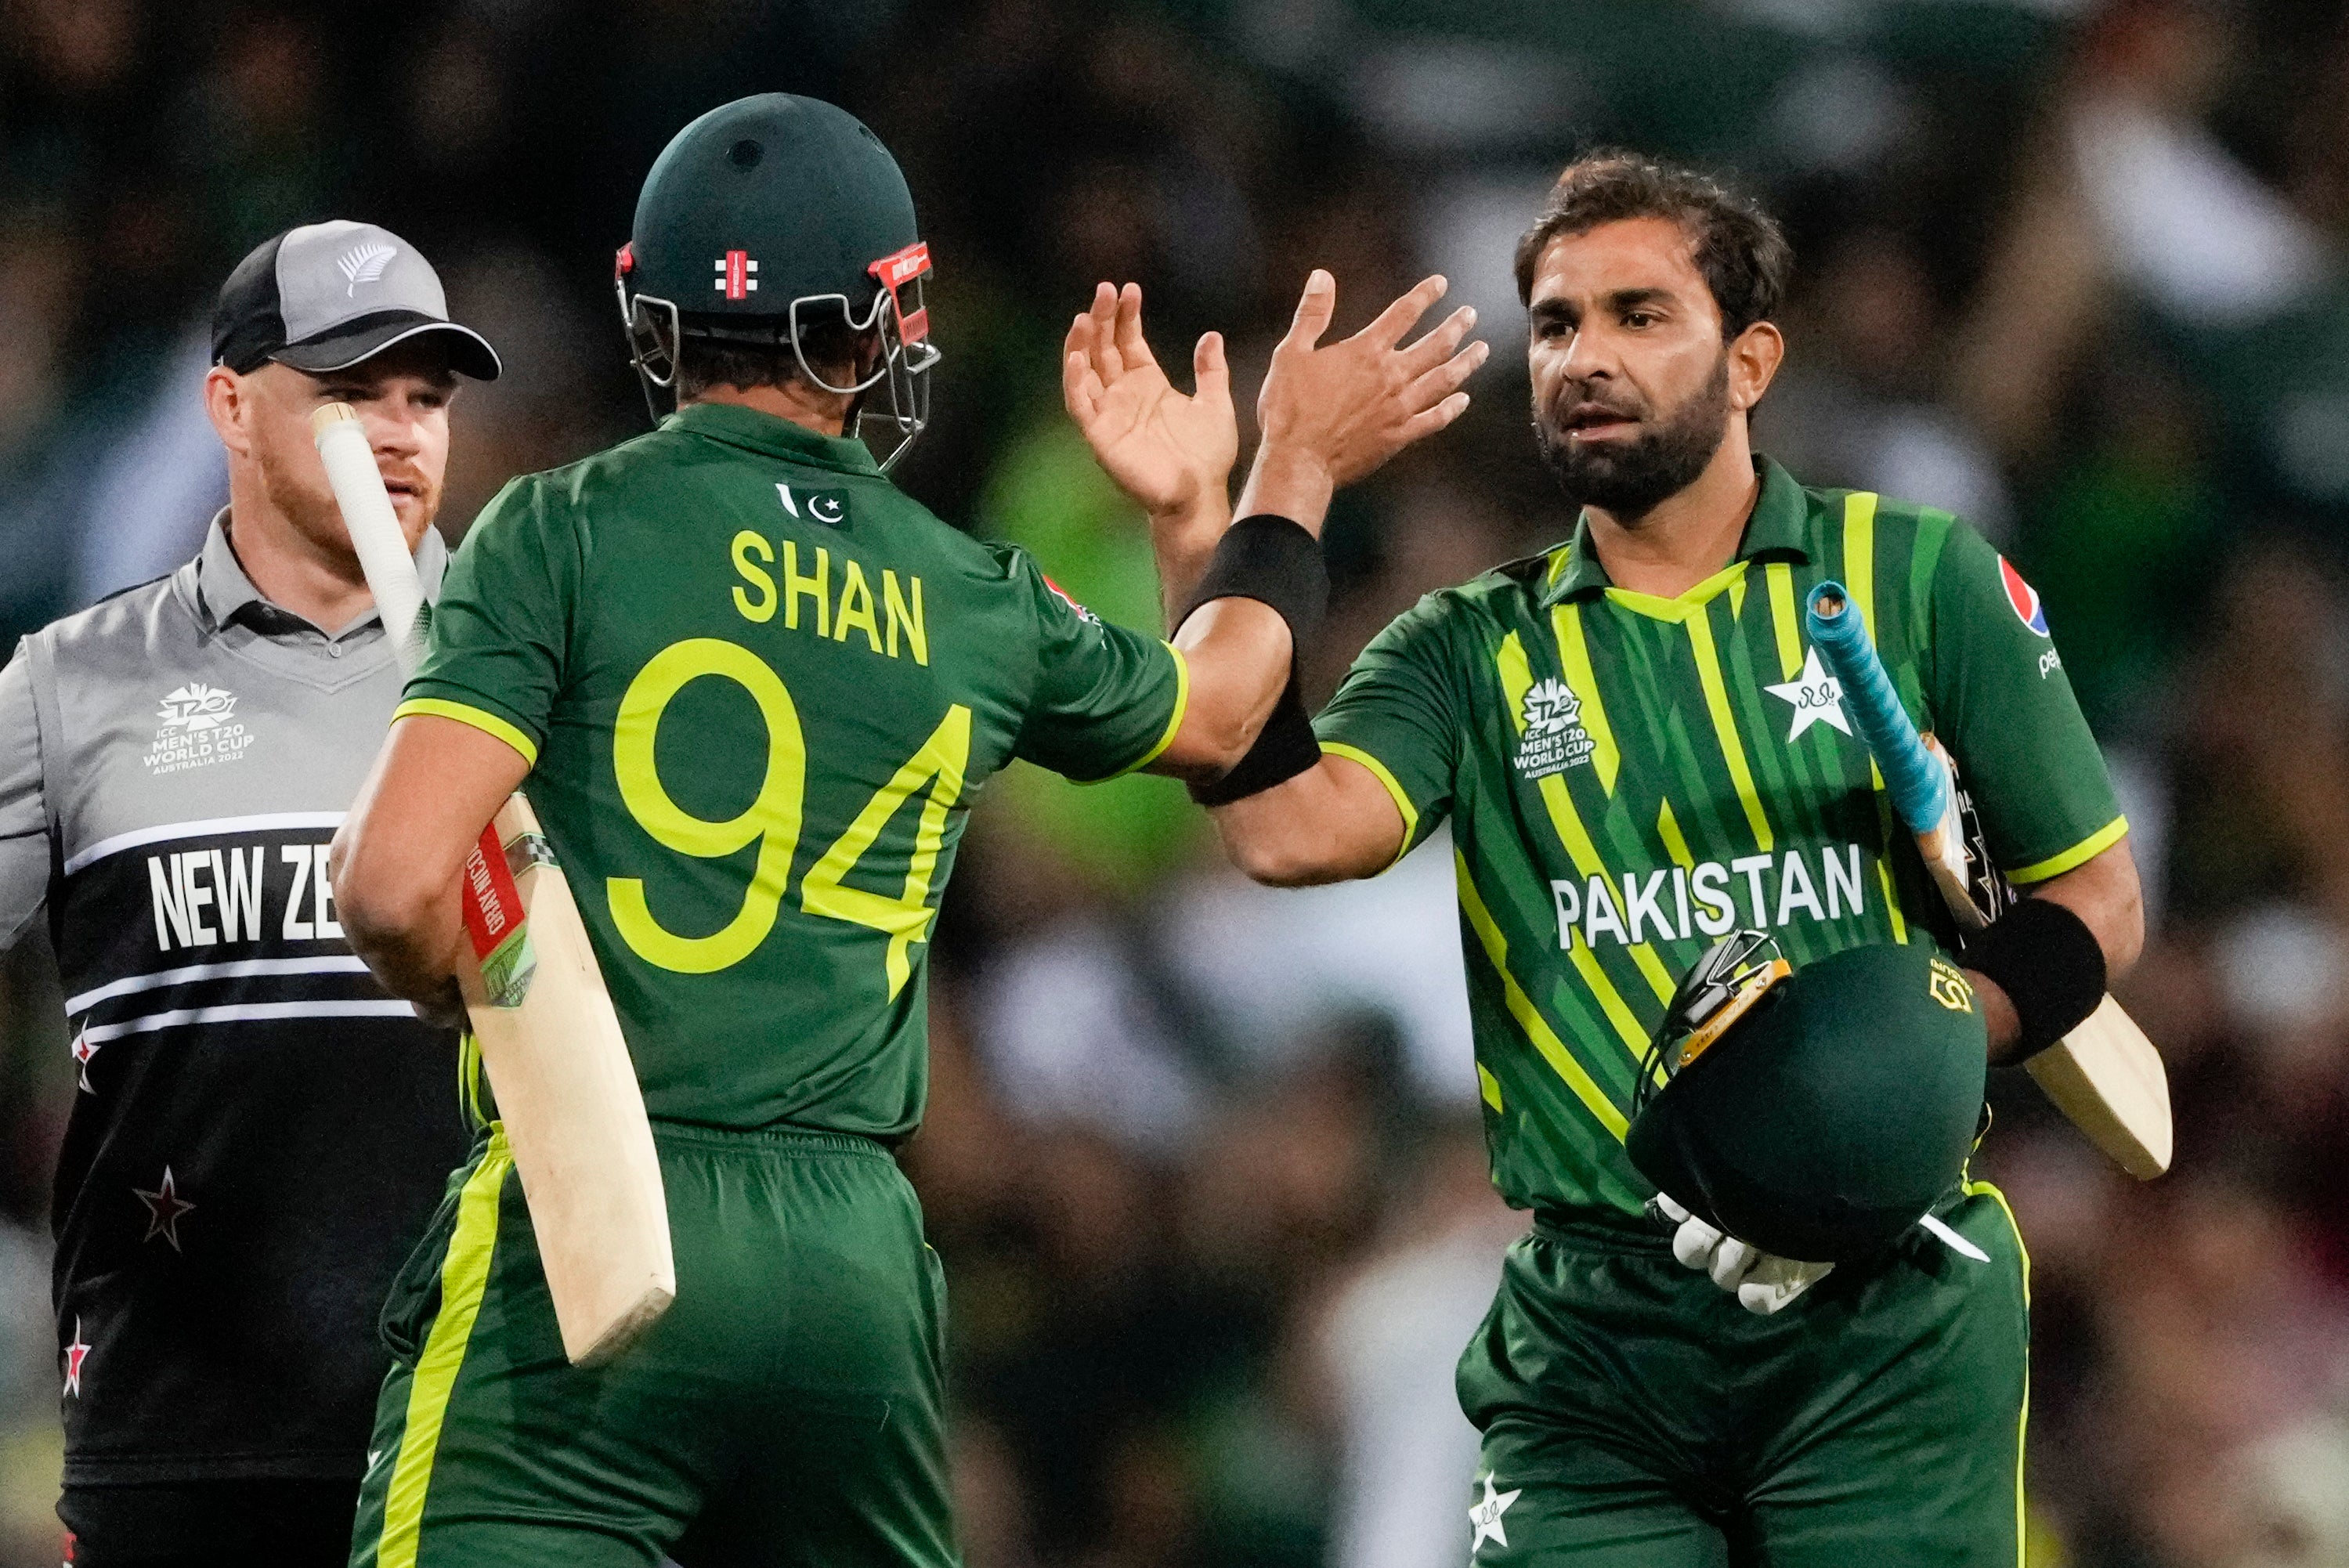 Pakistan will now play England or India in Sunday’s final